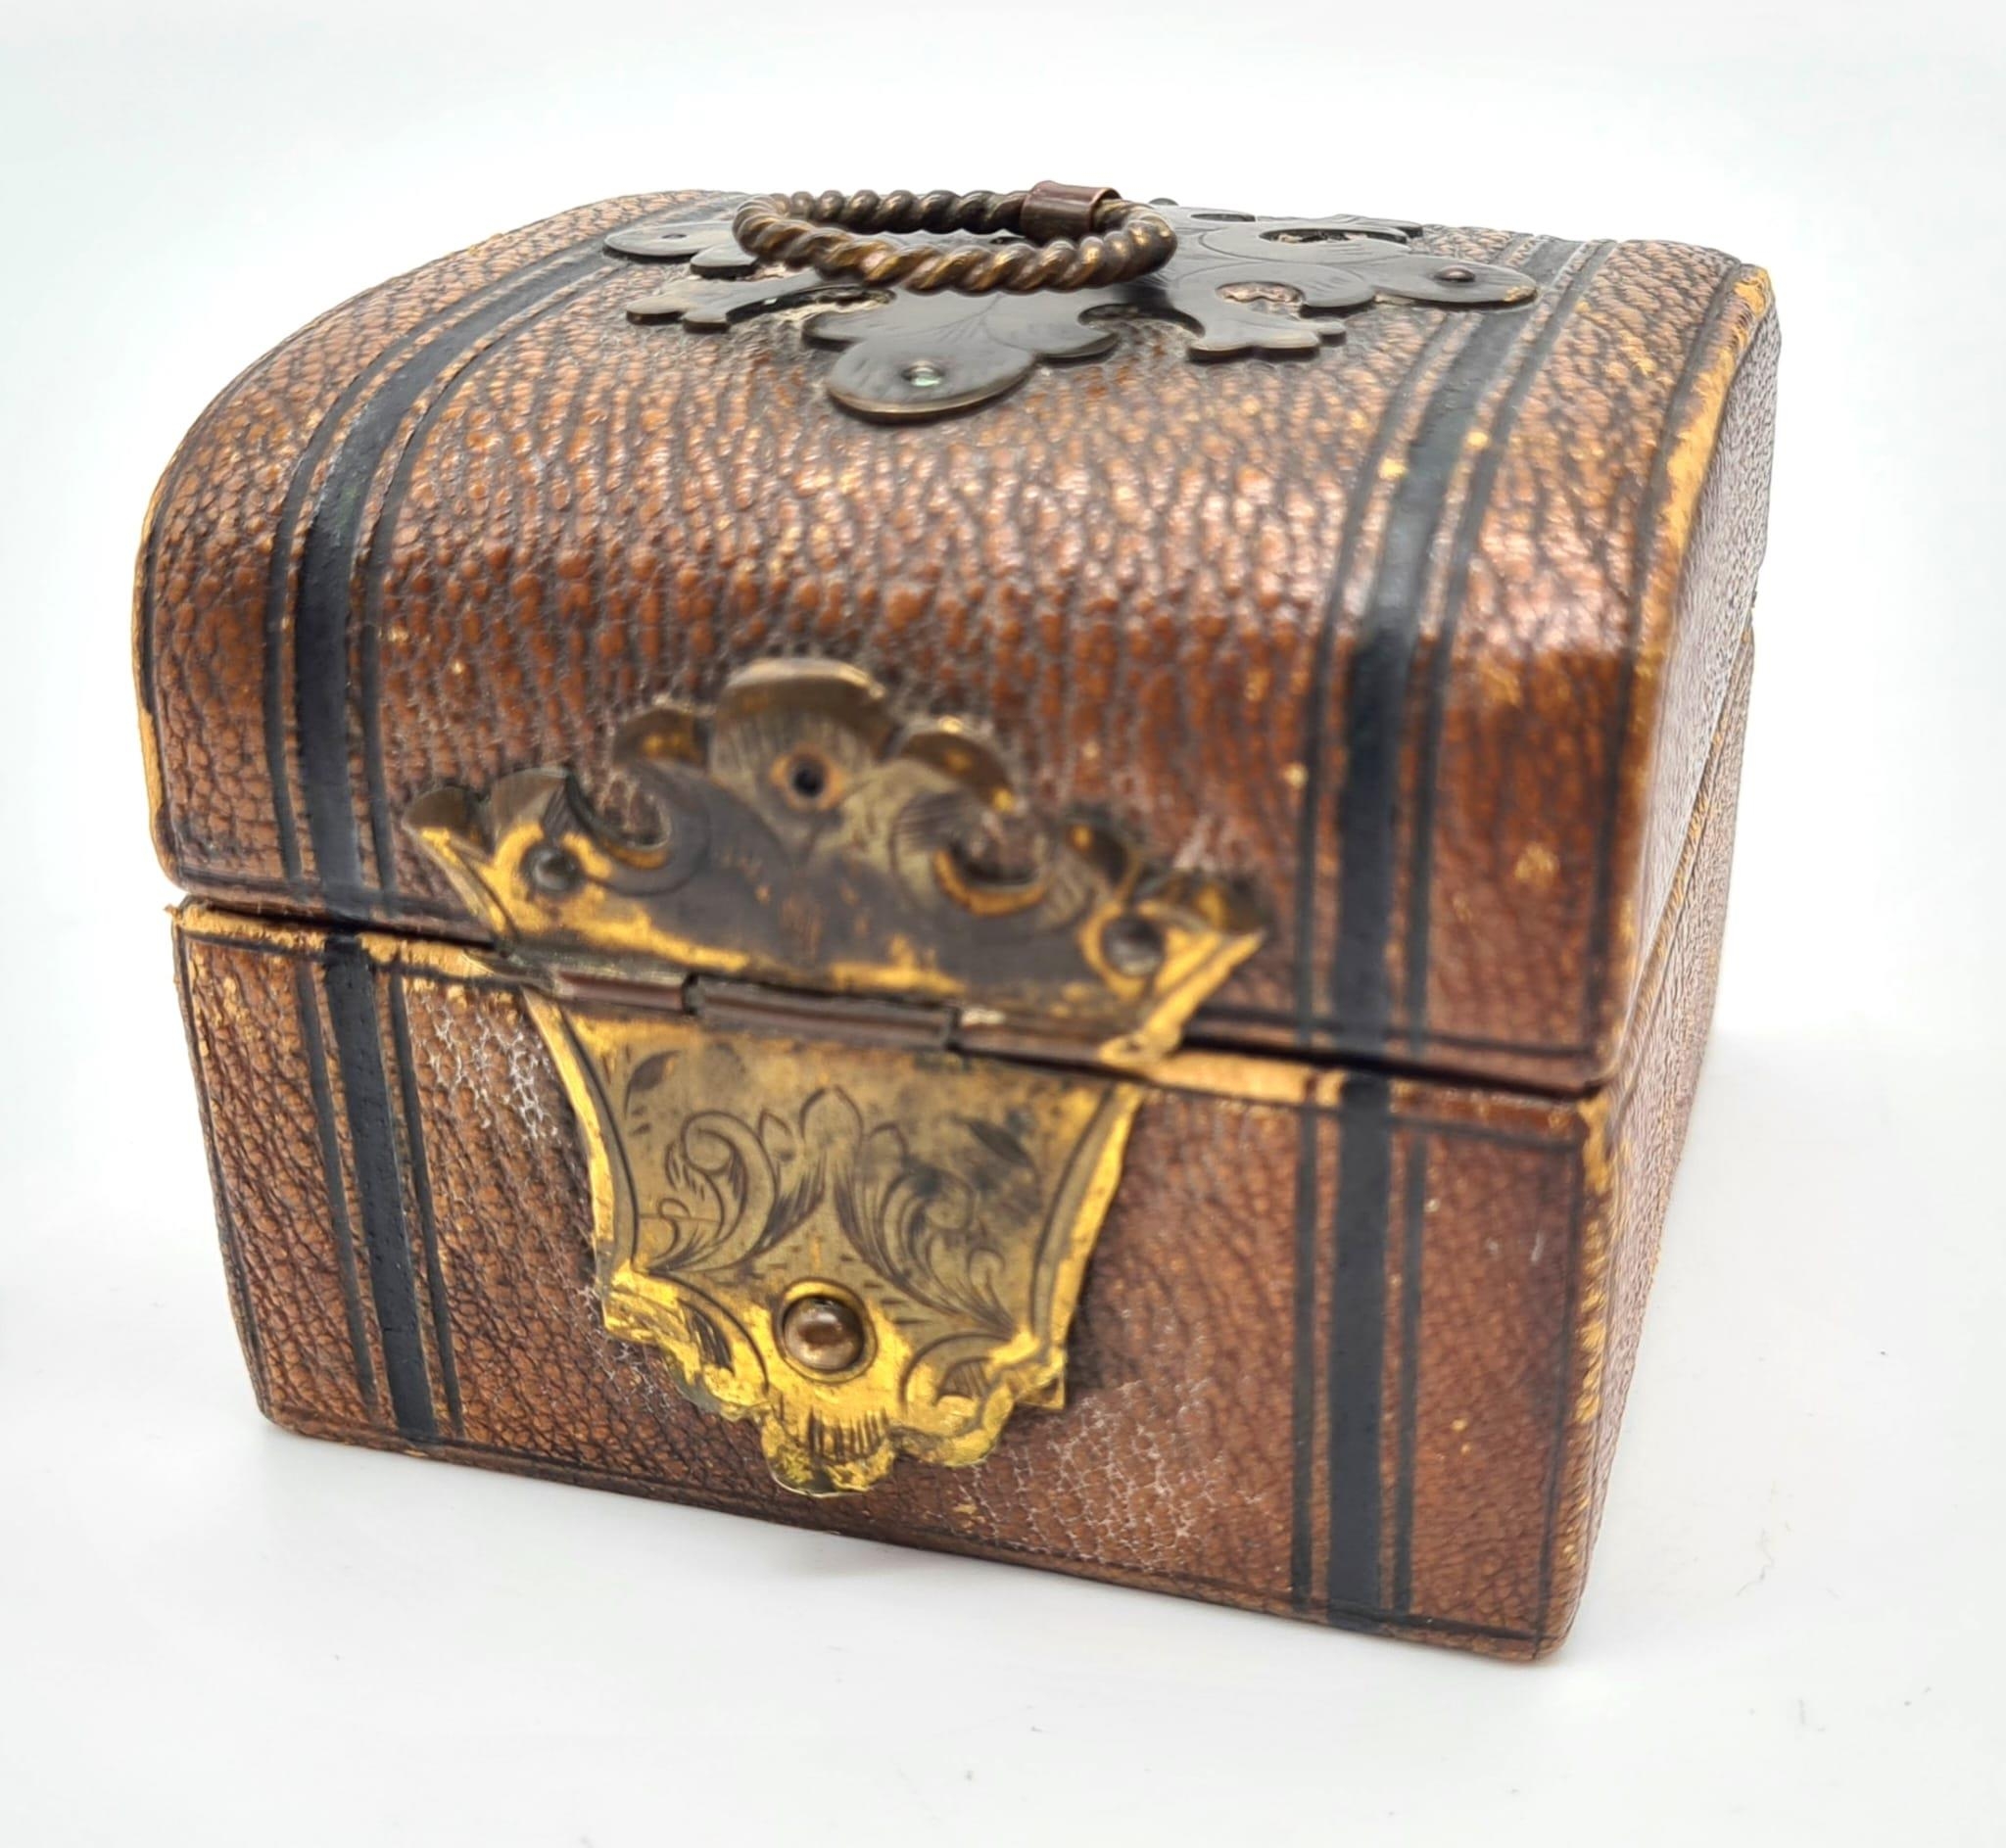 A VICTORIAN SET OF 4 GILT TOPPED PERFUME BOTTLES IN ORIGINALCARRYING BOX (BOX NEEDS HINGE ATTENTION) - Image 5 of 7